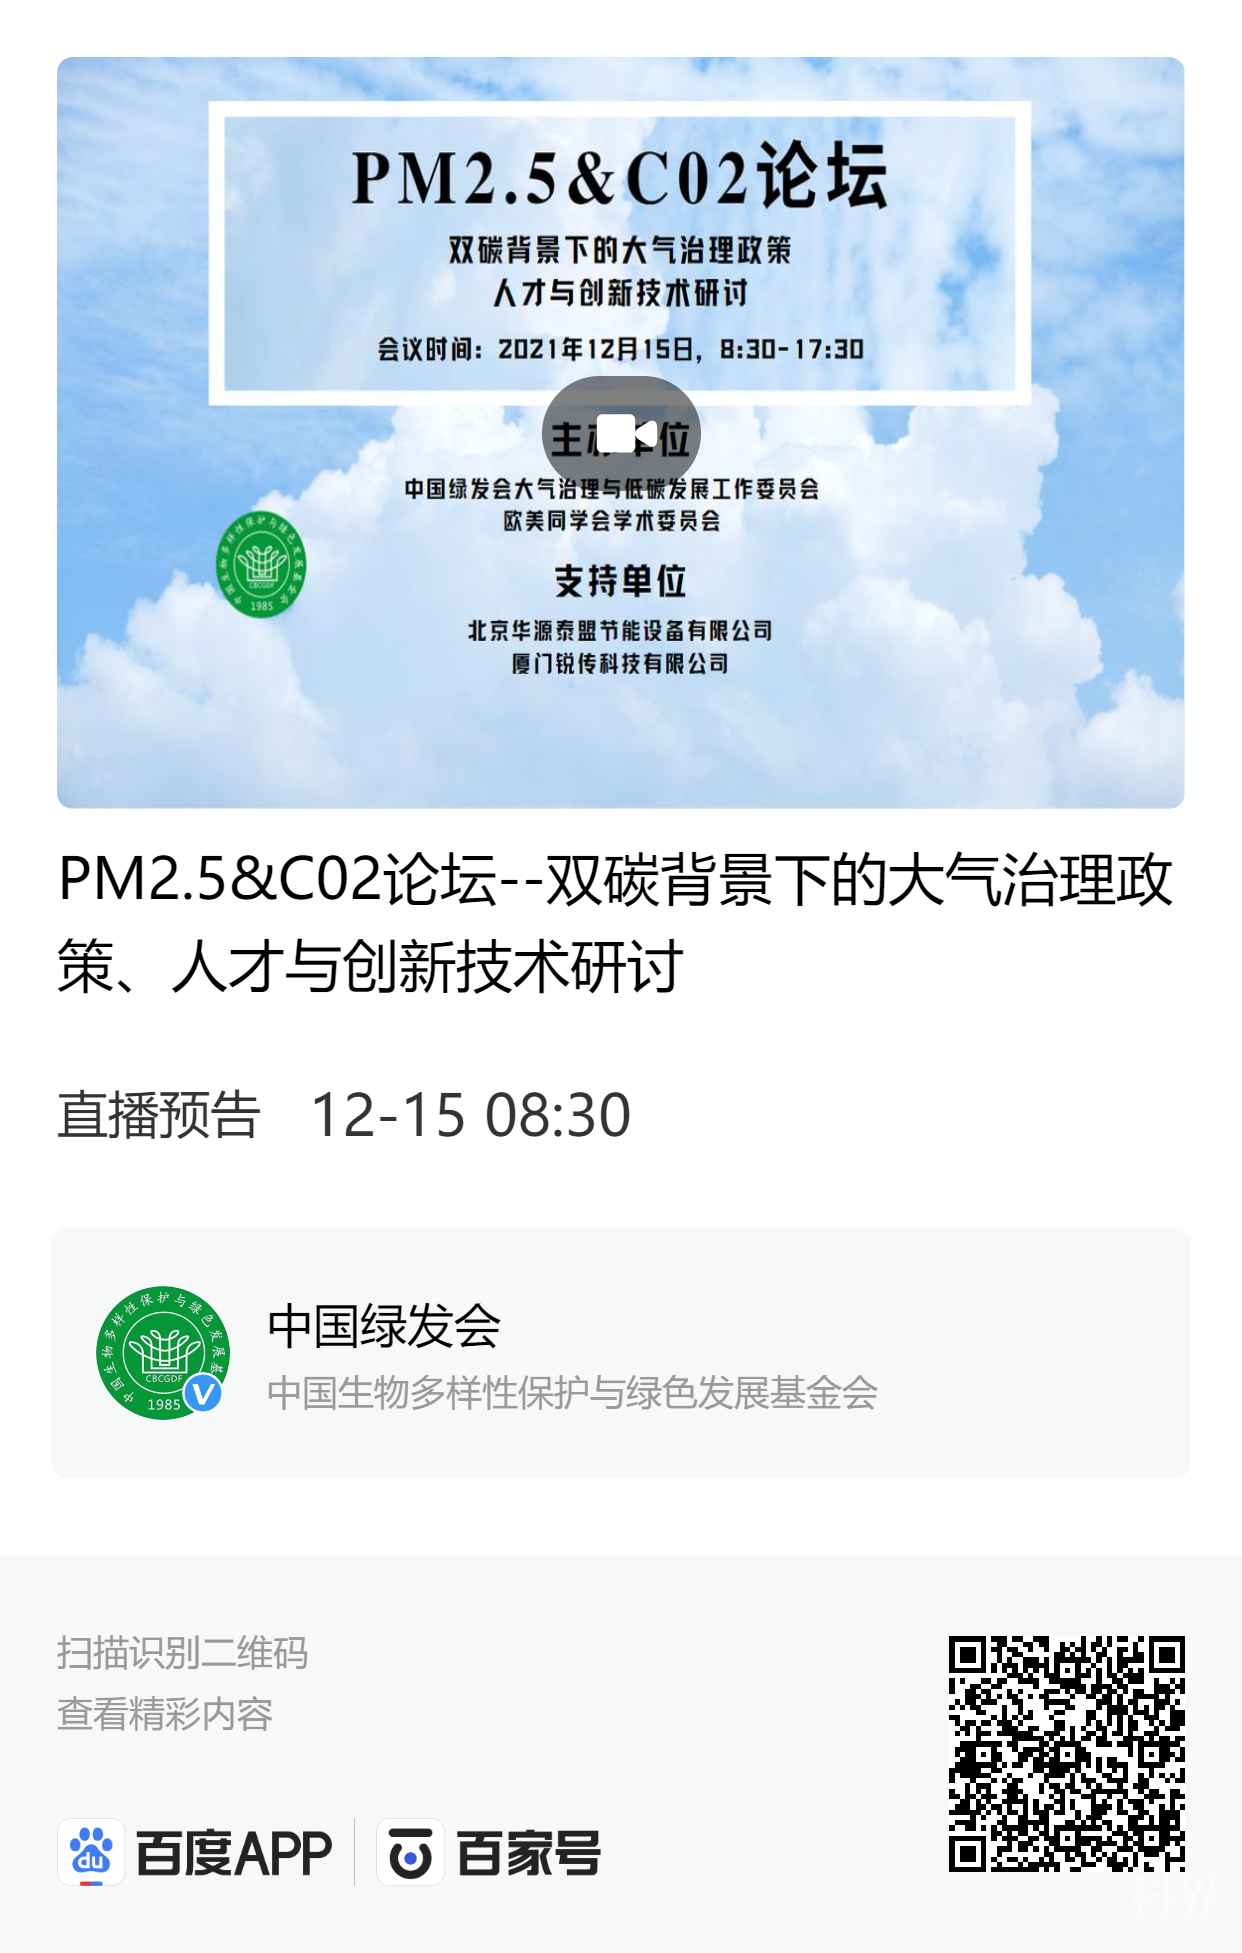 PM2.5&C02论坛海报.png